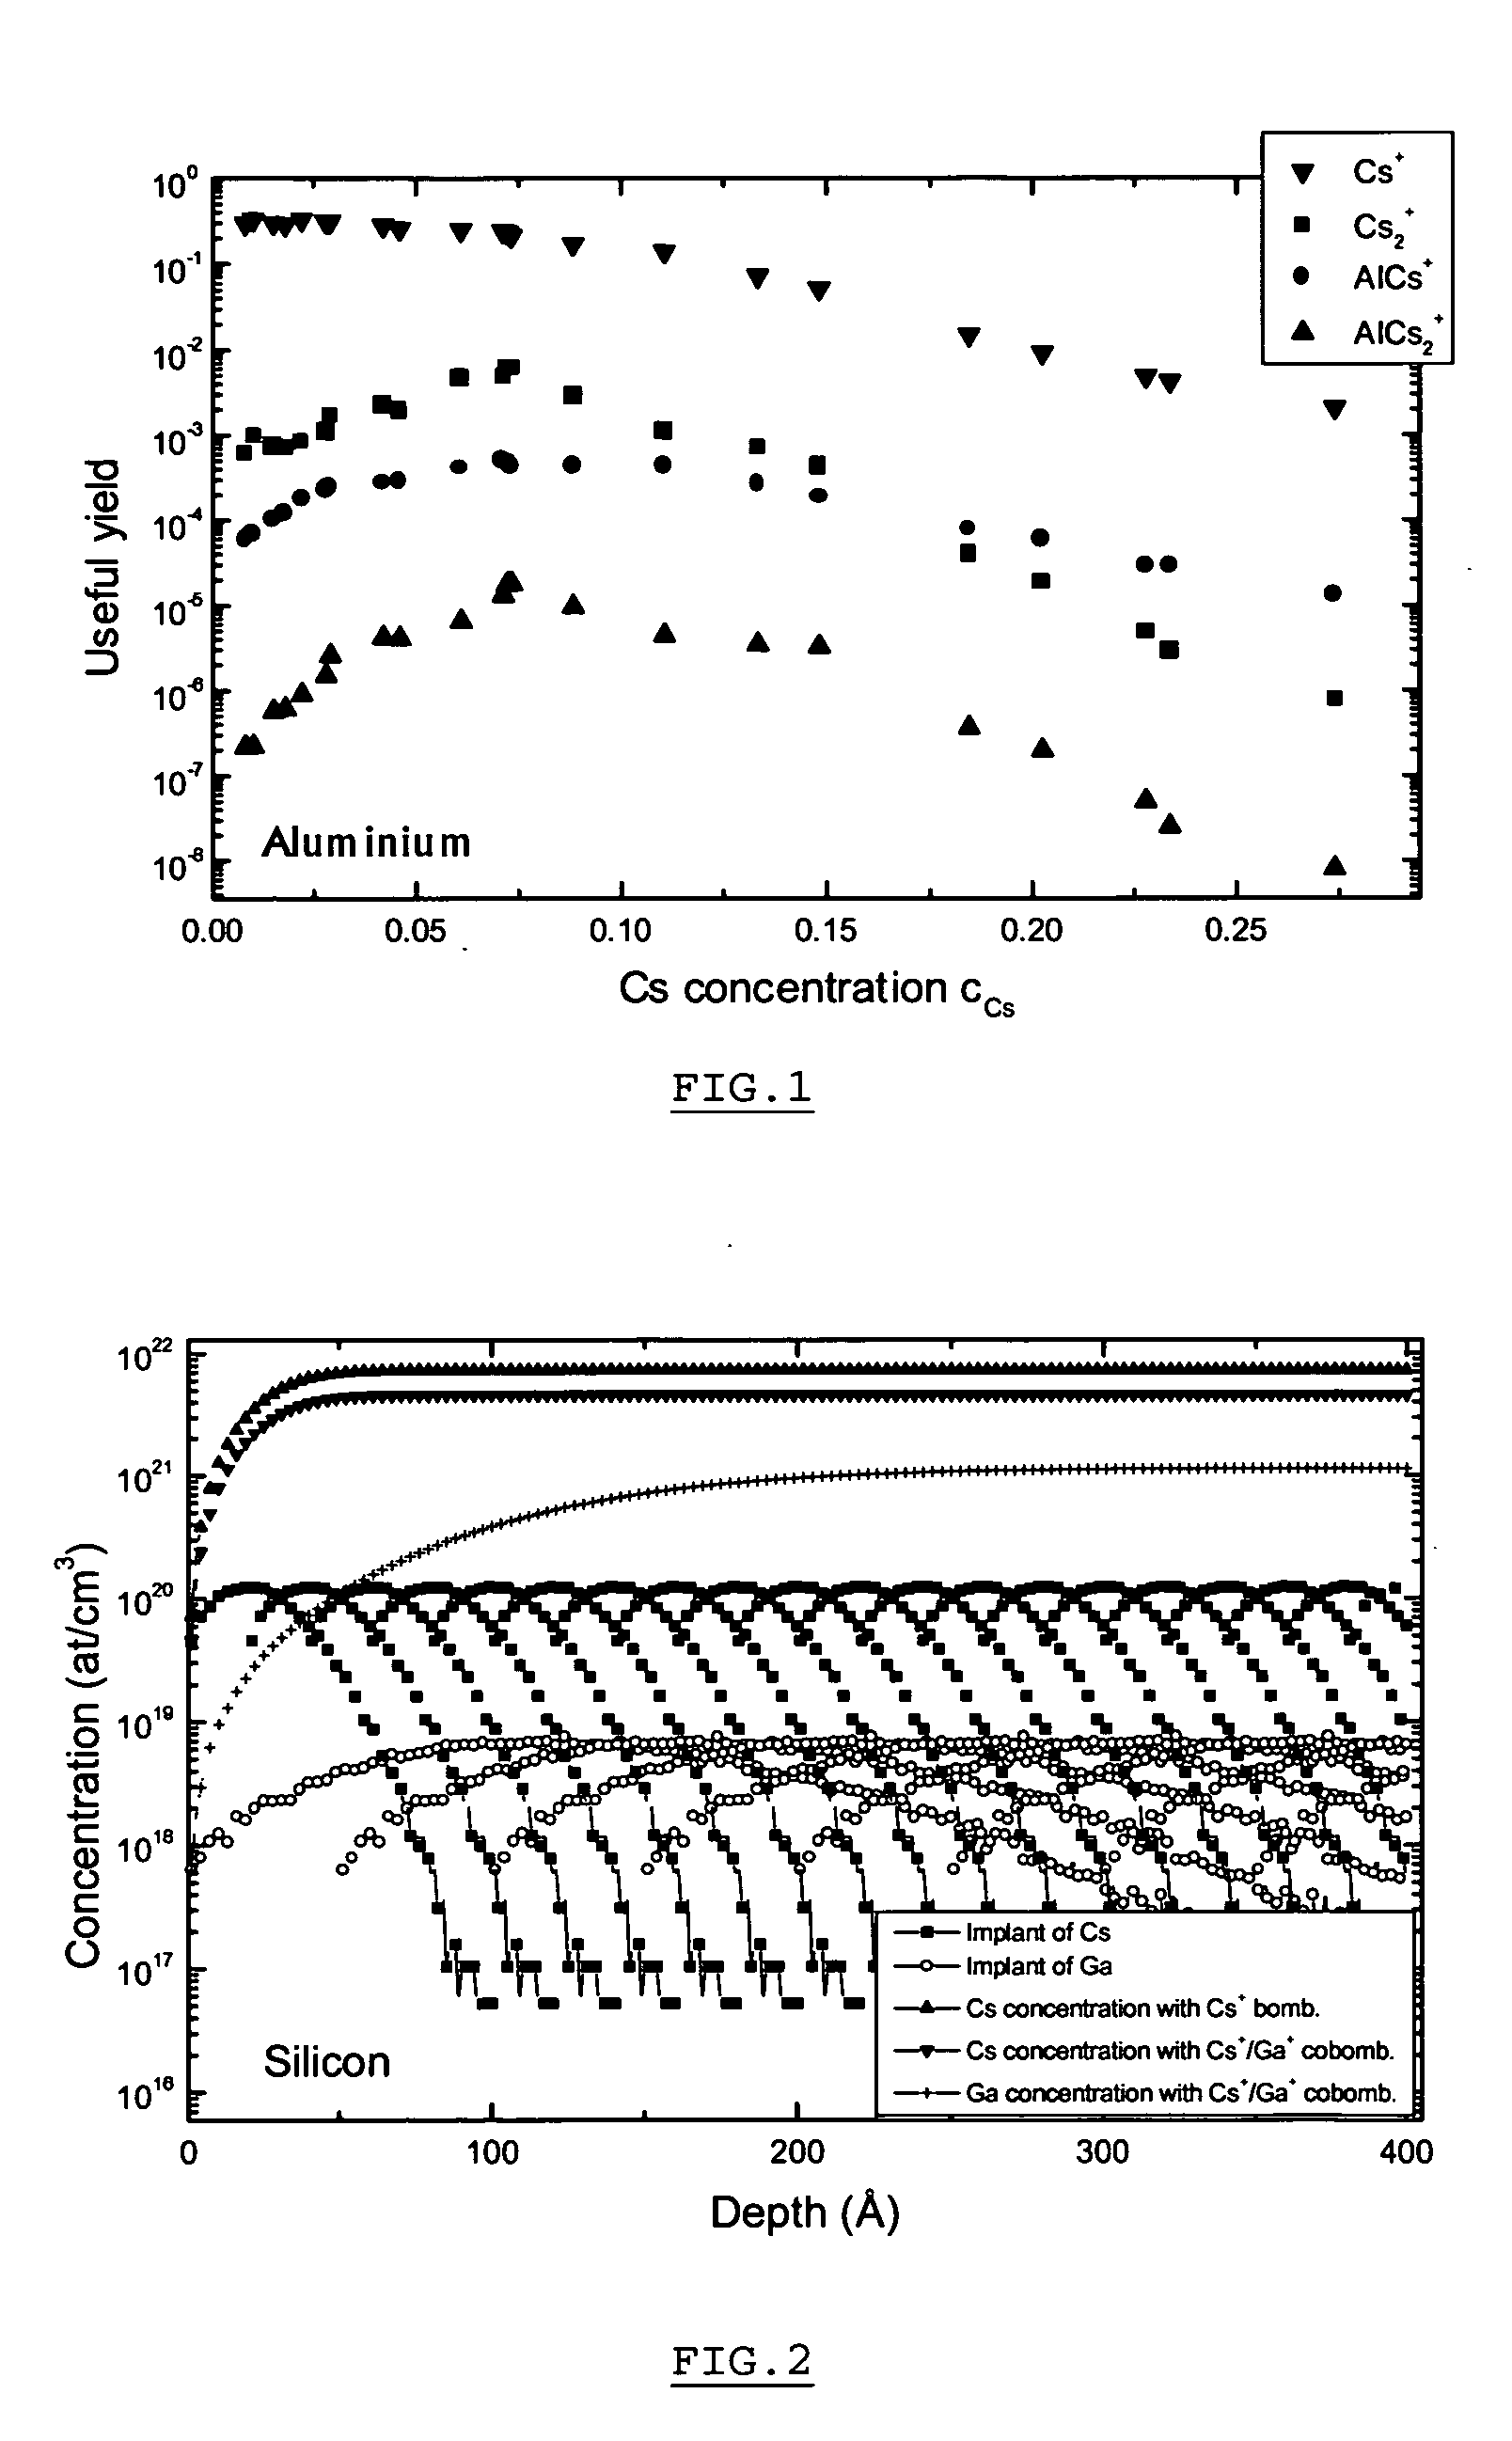 Method and apparatus for in situ depositing of neutral cs under ultra-high vacuum to analytical ends